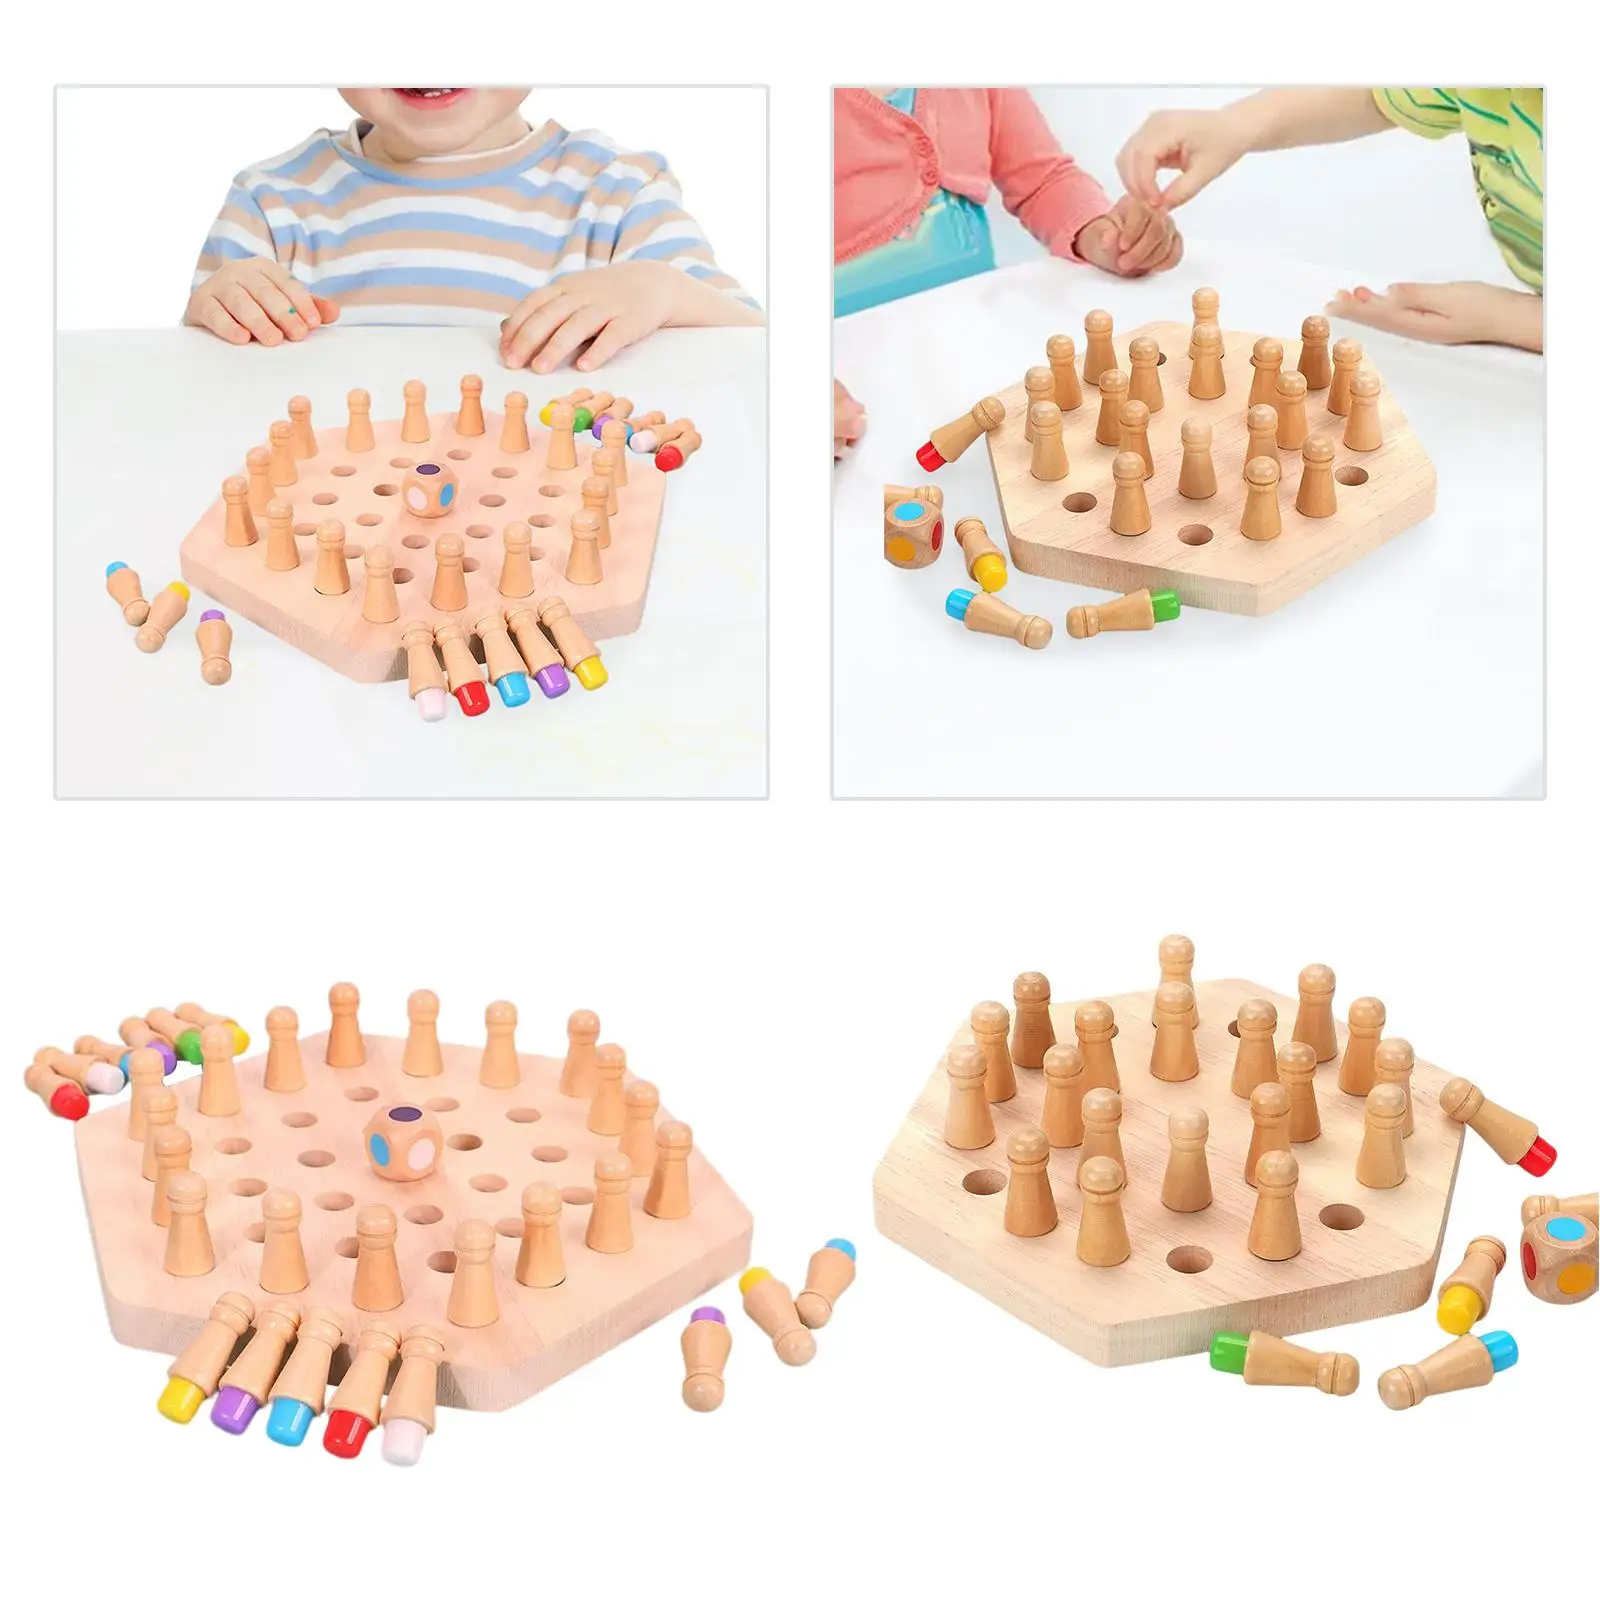 Wooden Memory Chess Game Logical Thinking Traning for Party Parent Child Desktop Board Game Development Toy